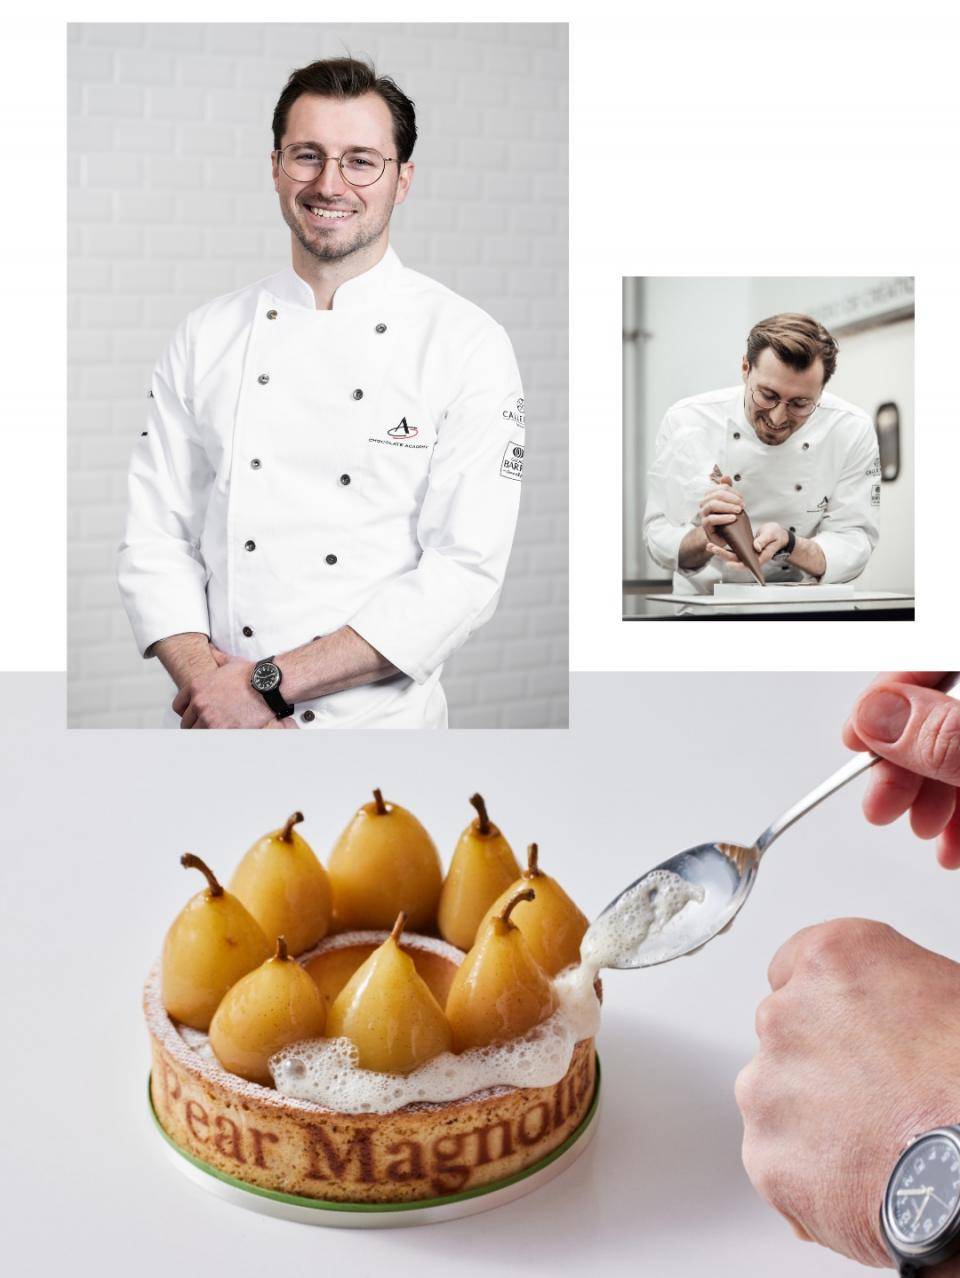 Images of Nicoll Notter and the pear dessert he contribute to So Good #29